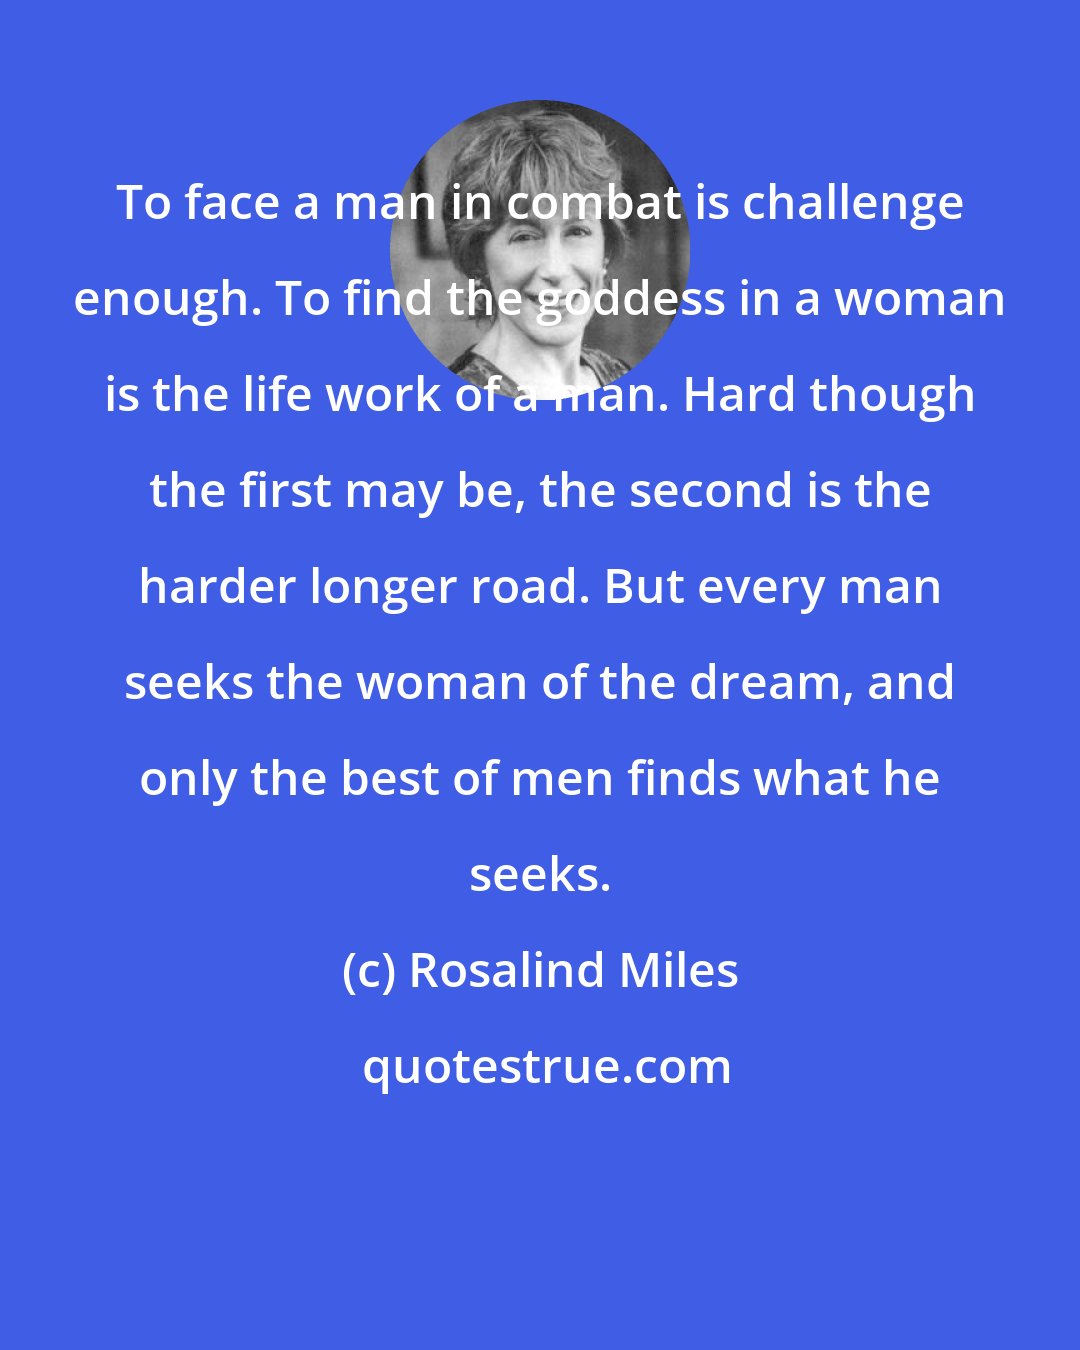 Rosalind Miles: To face a man in combat is challenge enough. To find the goddess in a woman is the life work of a man. Hard though the first may be, the second is the harder longer road. But every man seeks the woman of the dream, and only the best of men finds what he seeks.